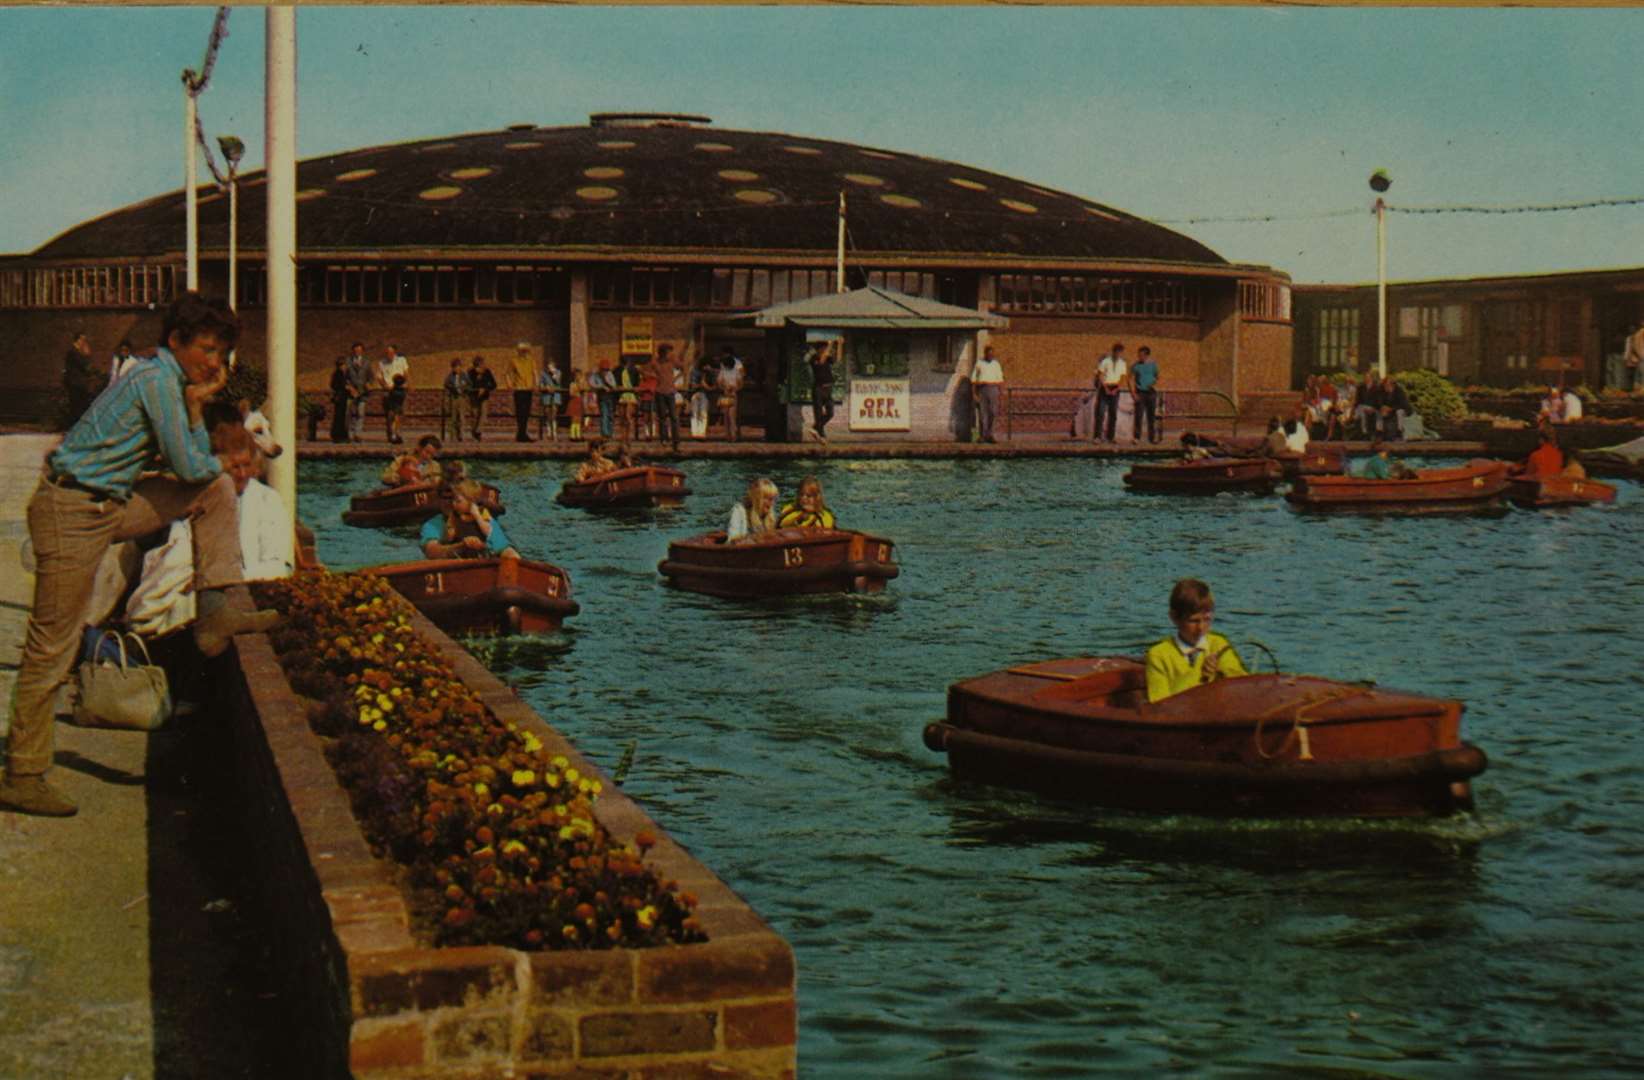 The Dome, with the boating pool. Date unknown